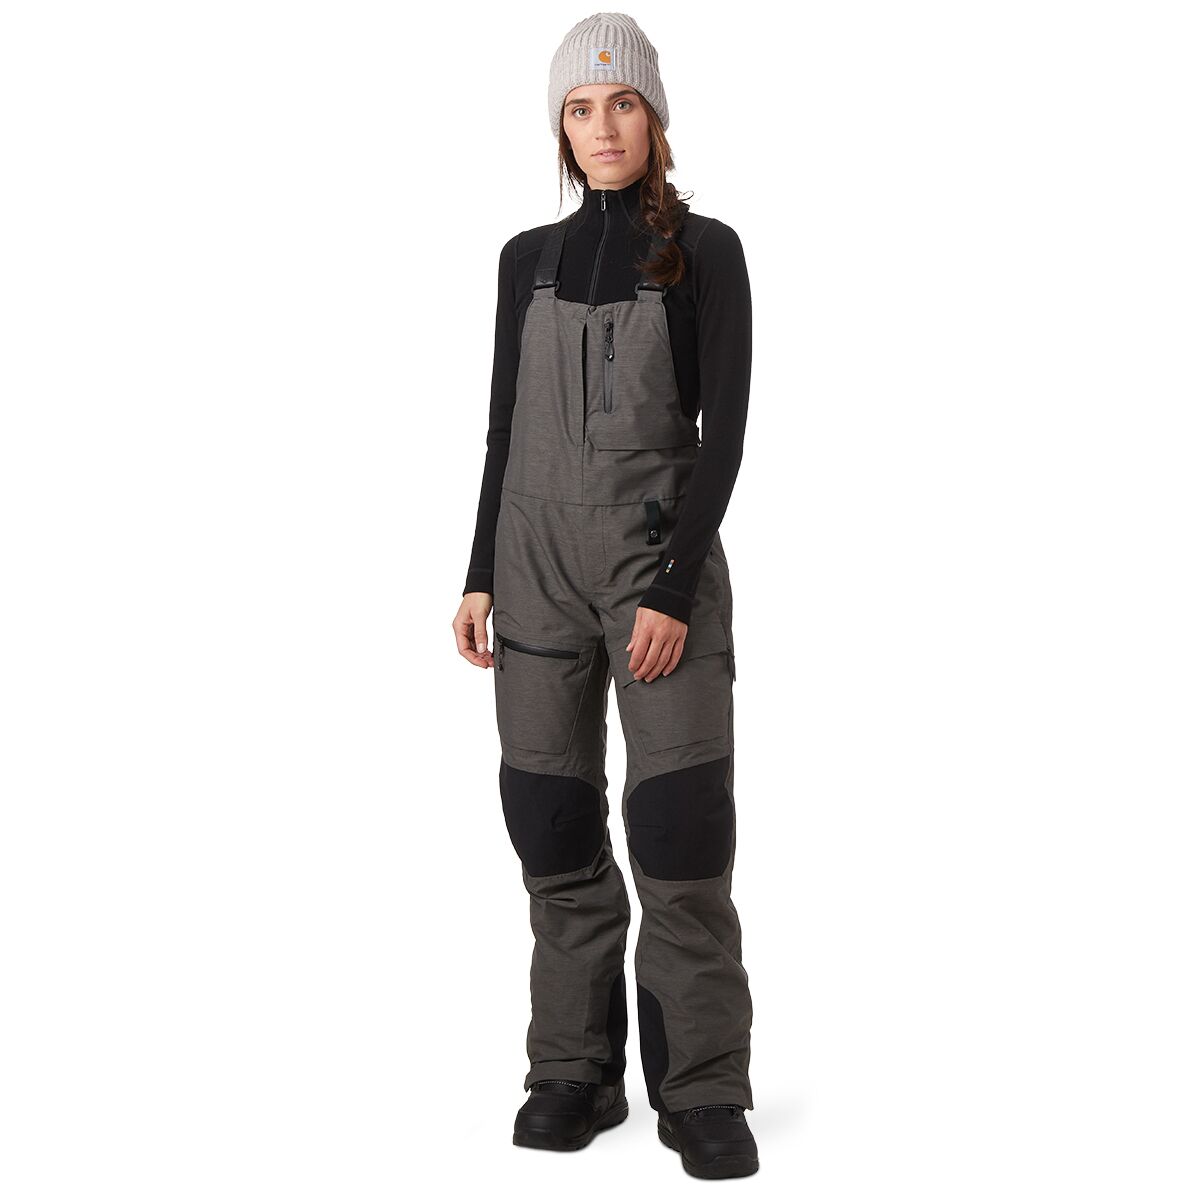 686 GLCR Geode Thermagraph Bib Pant - Women's | Backcountry.com